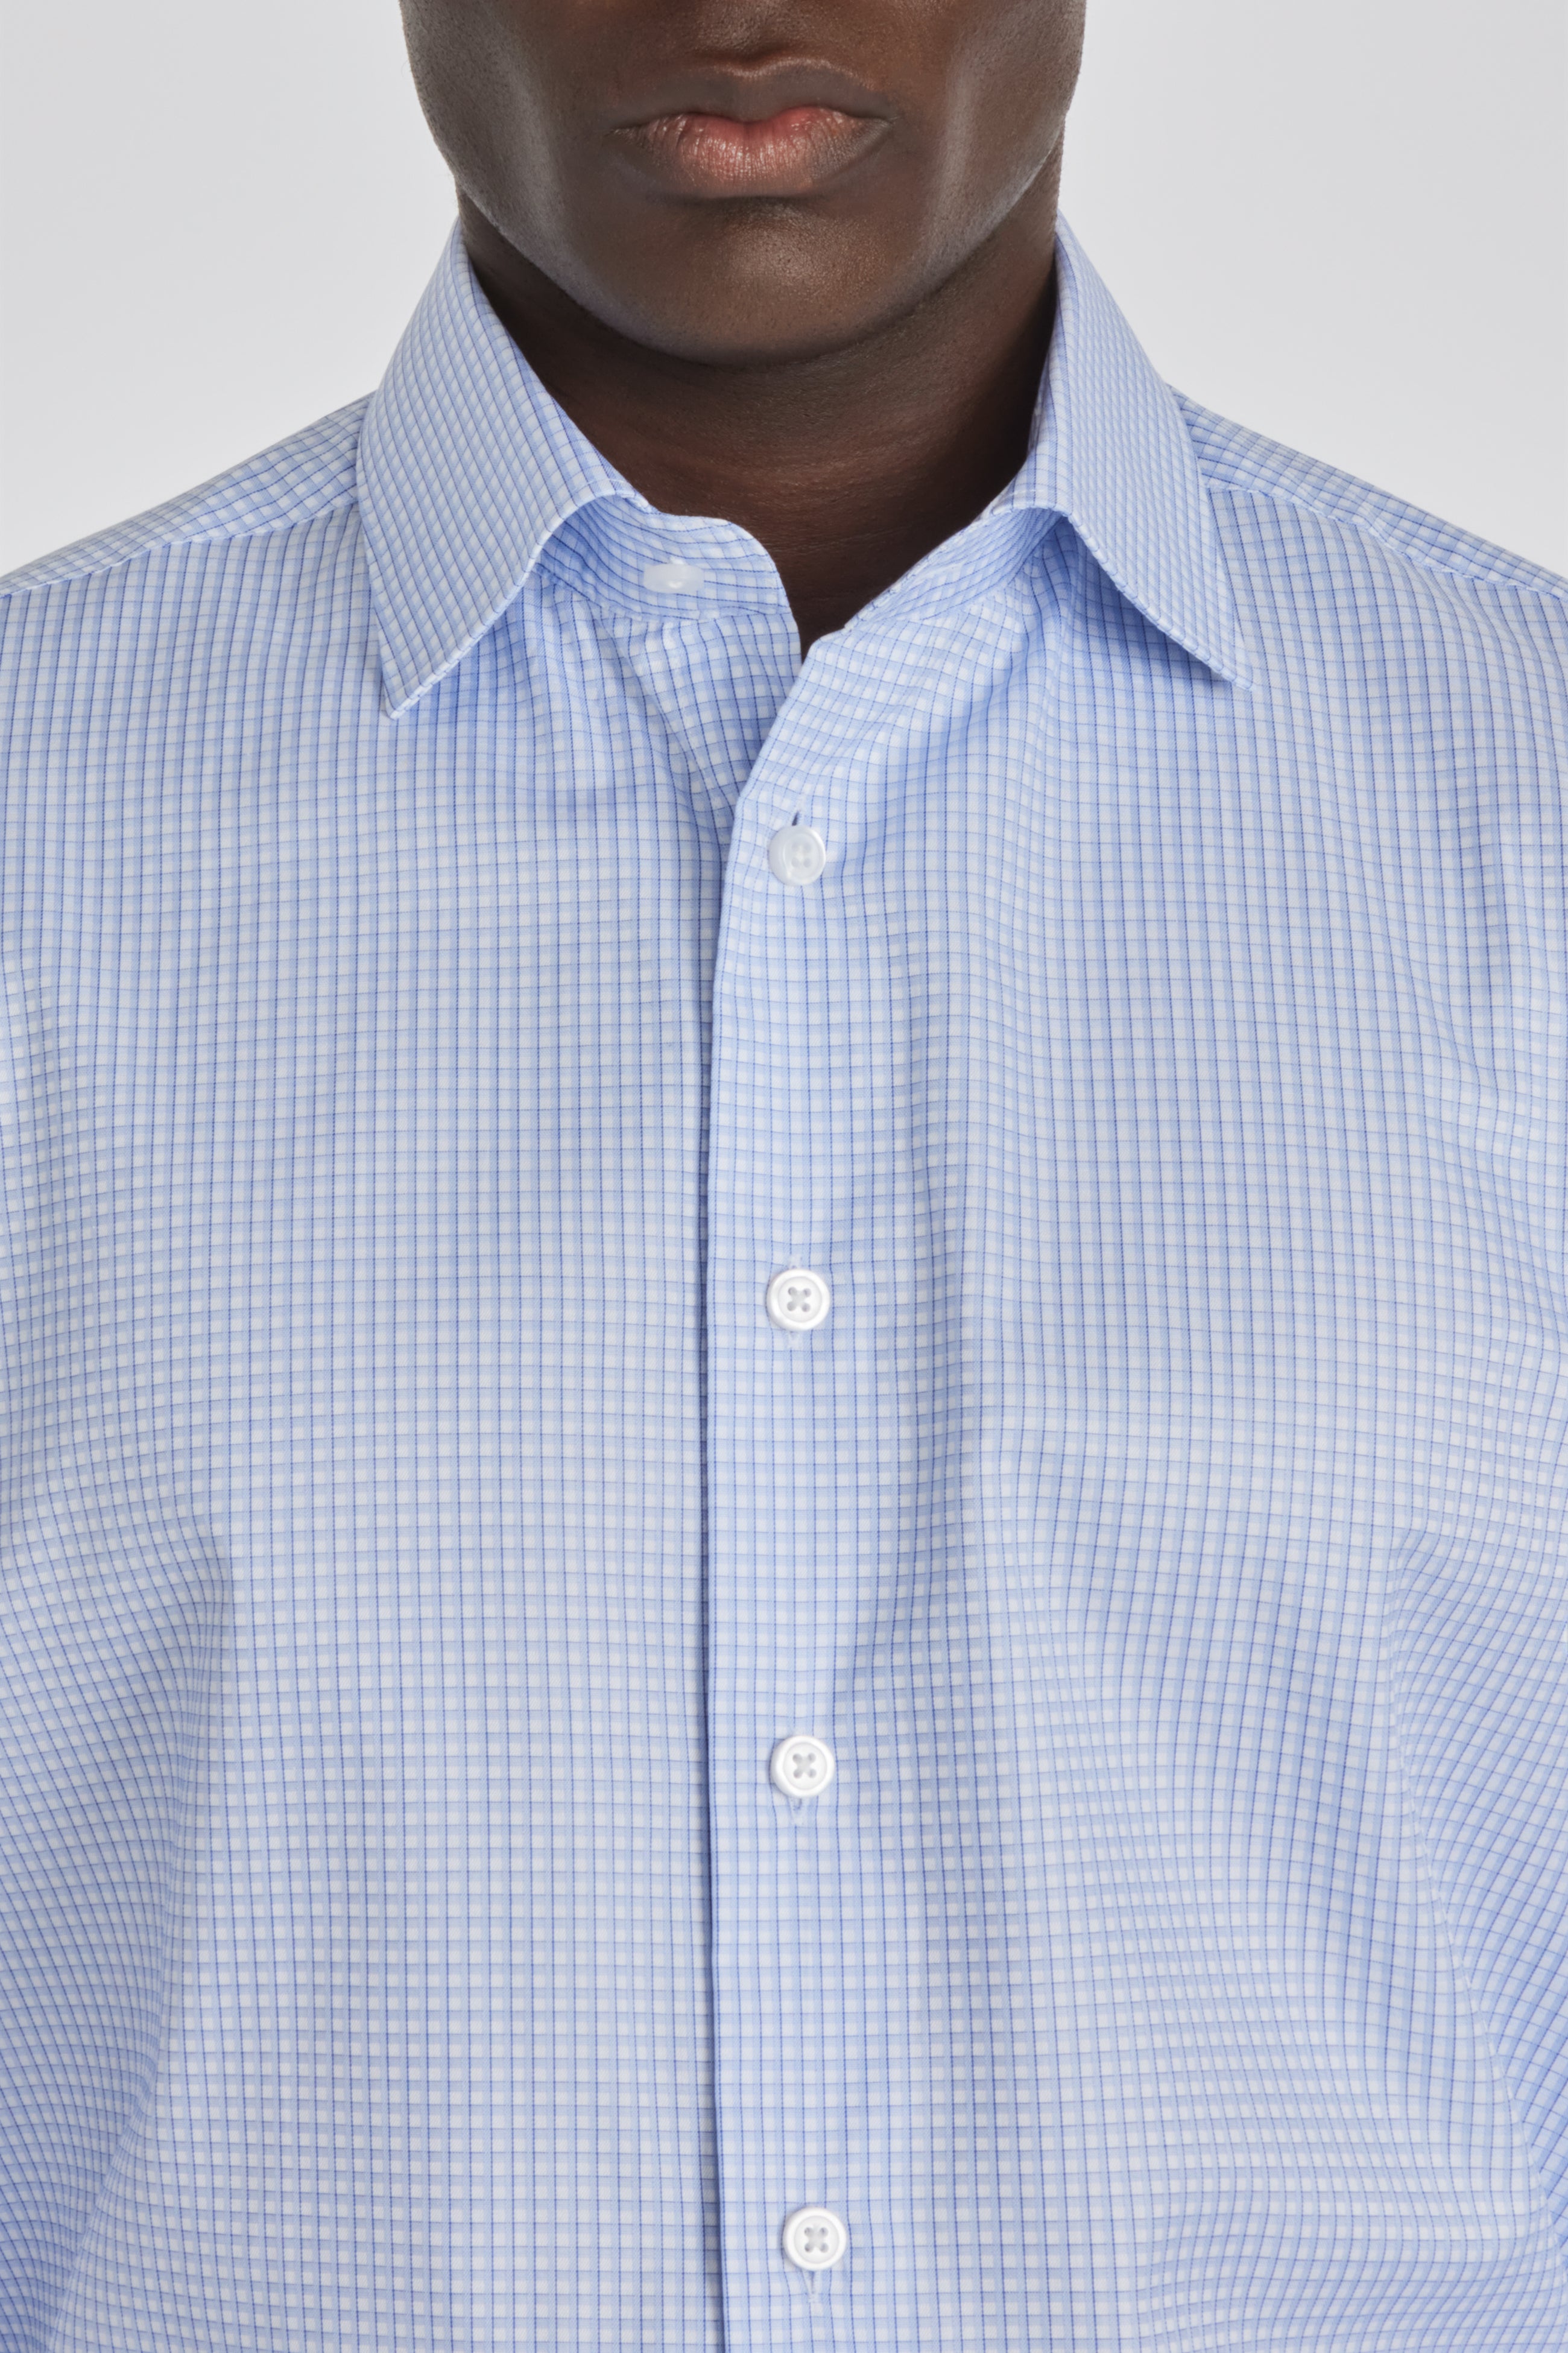 Alt view 2 Box Check Cotton Dress Shirt in Blue and White